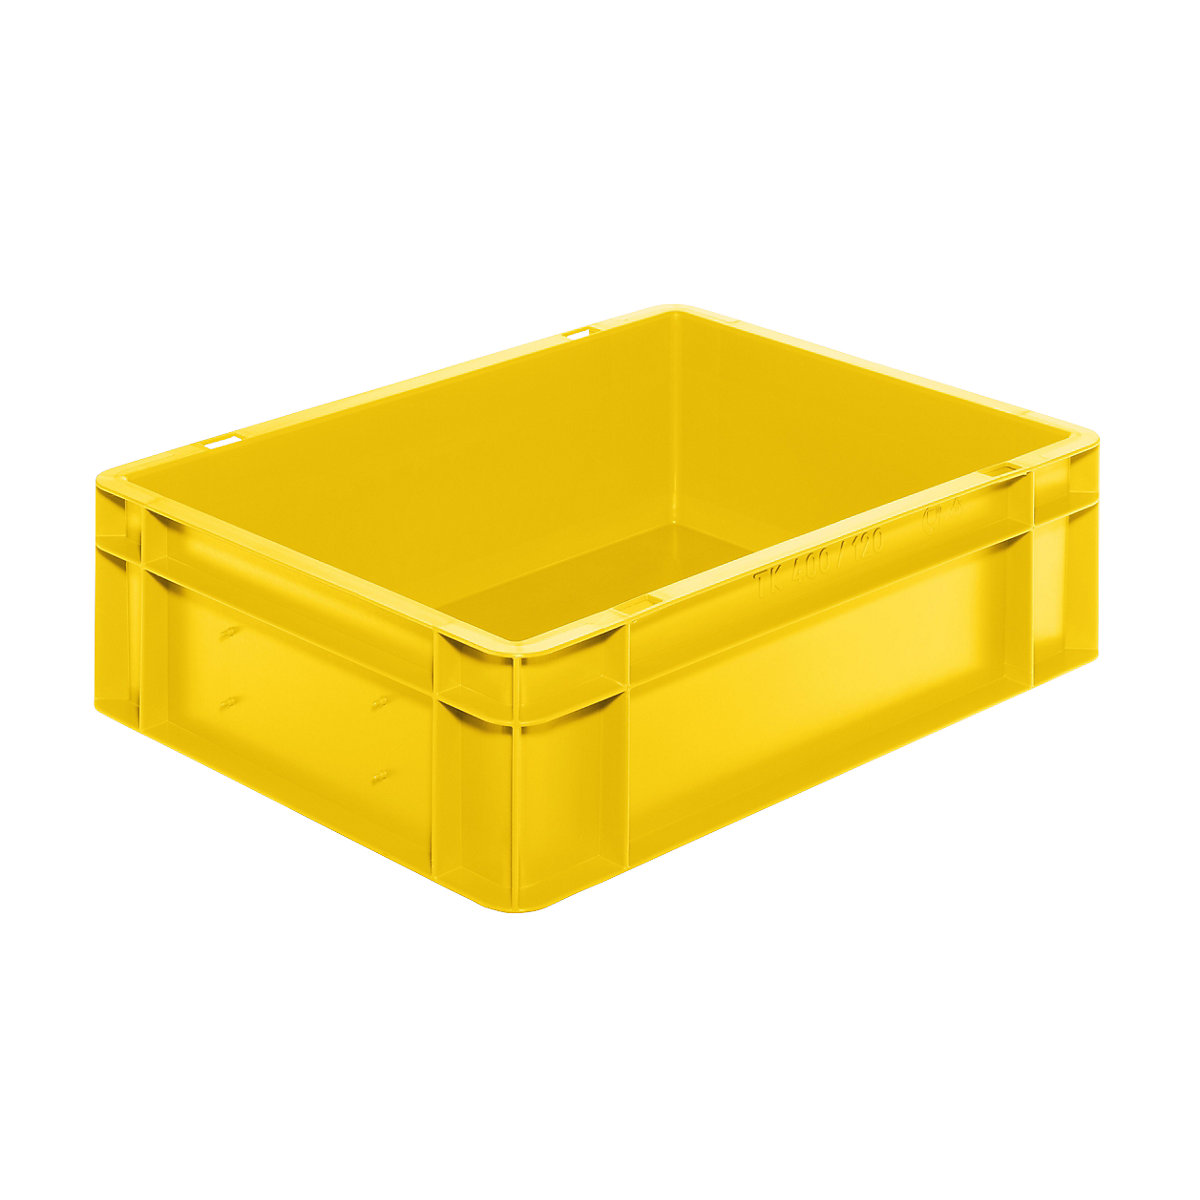 Euro stacking container, closed walls and base, LxWxH 400 x 300 x 120 mm, yellow, pack of 5